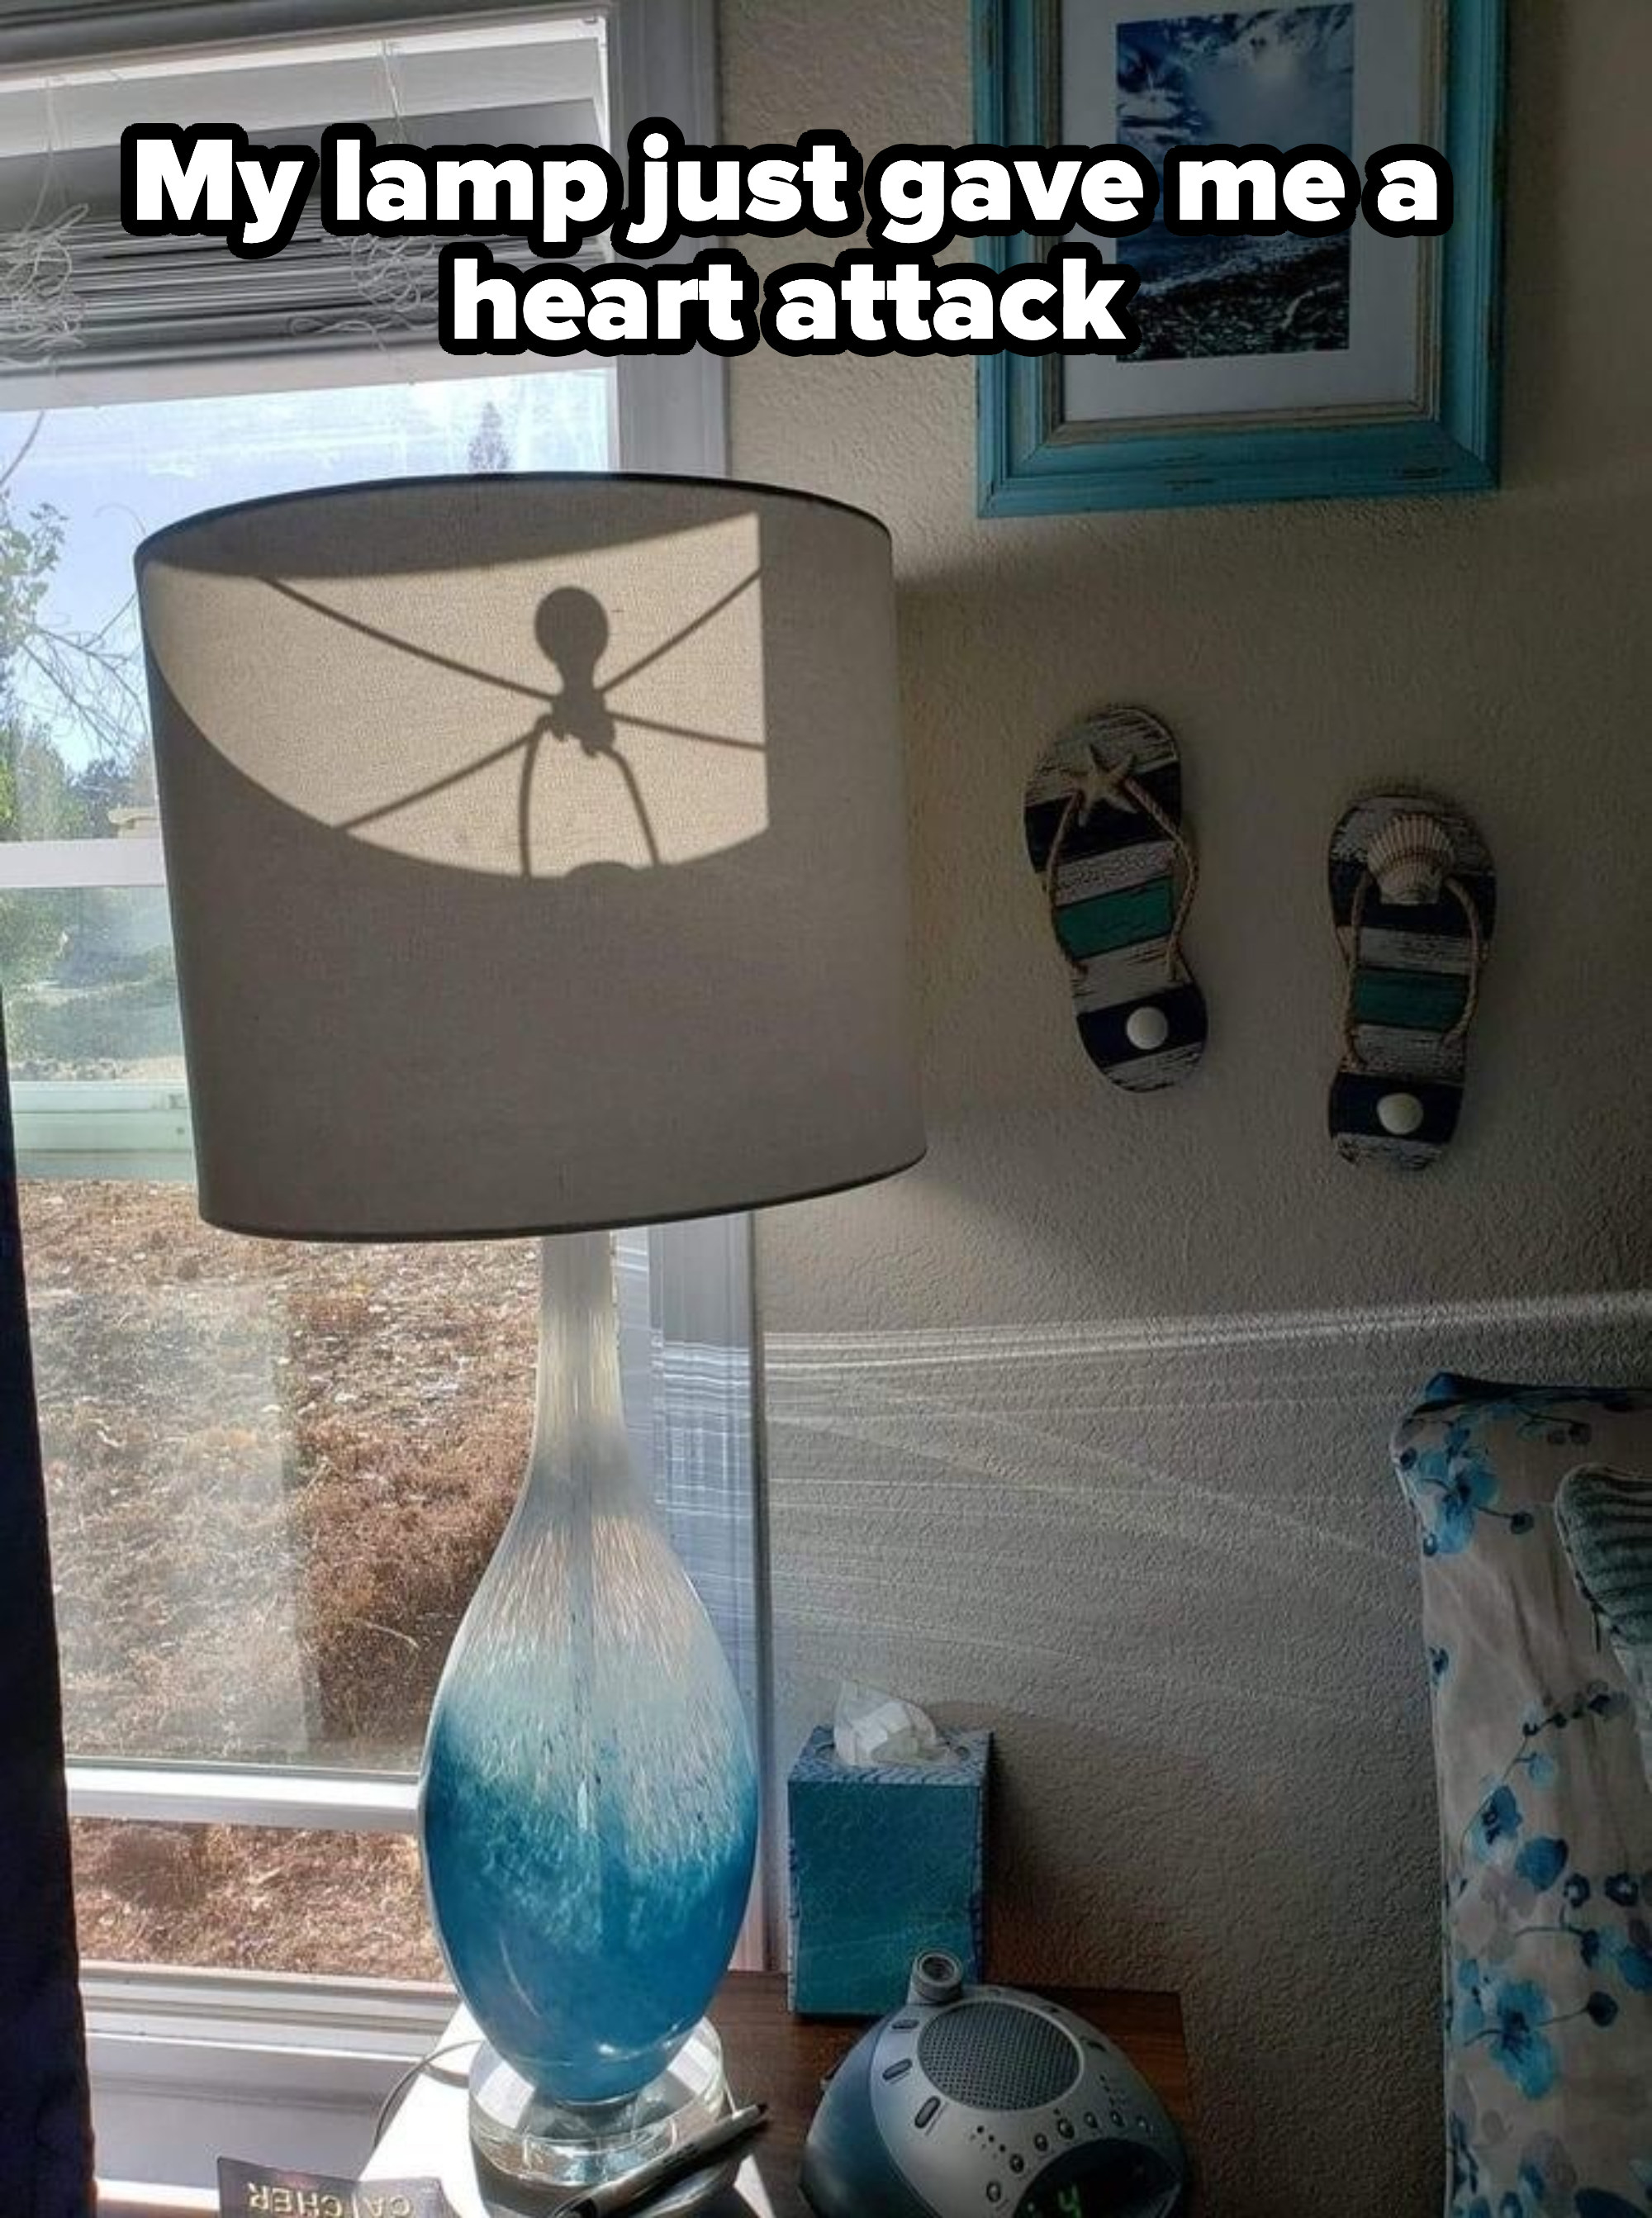 shadow on the lamp looks like a large spider